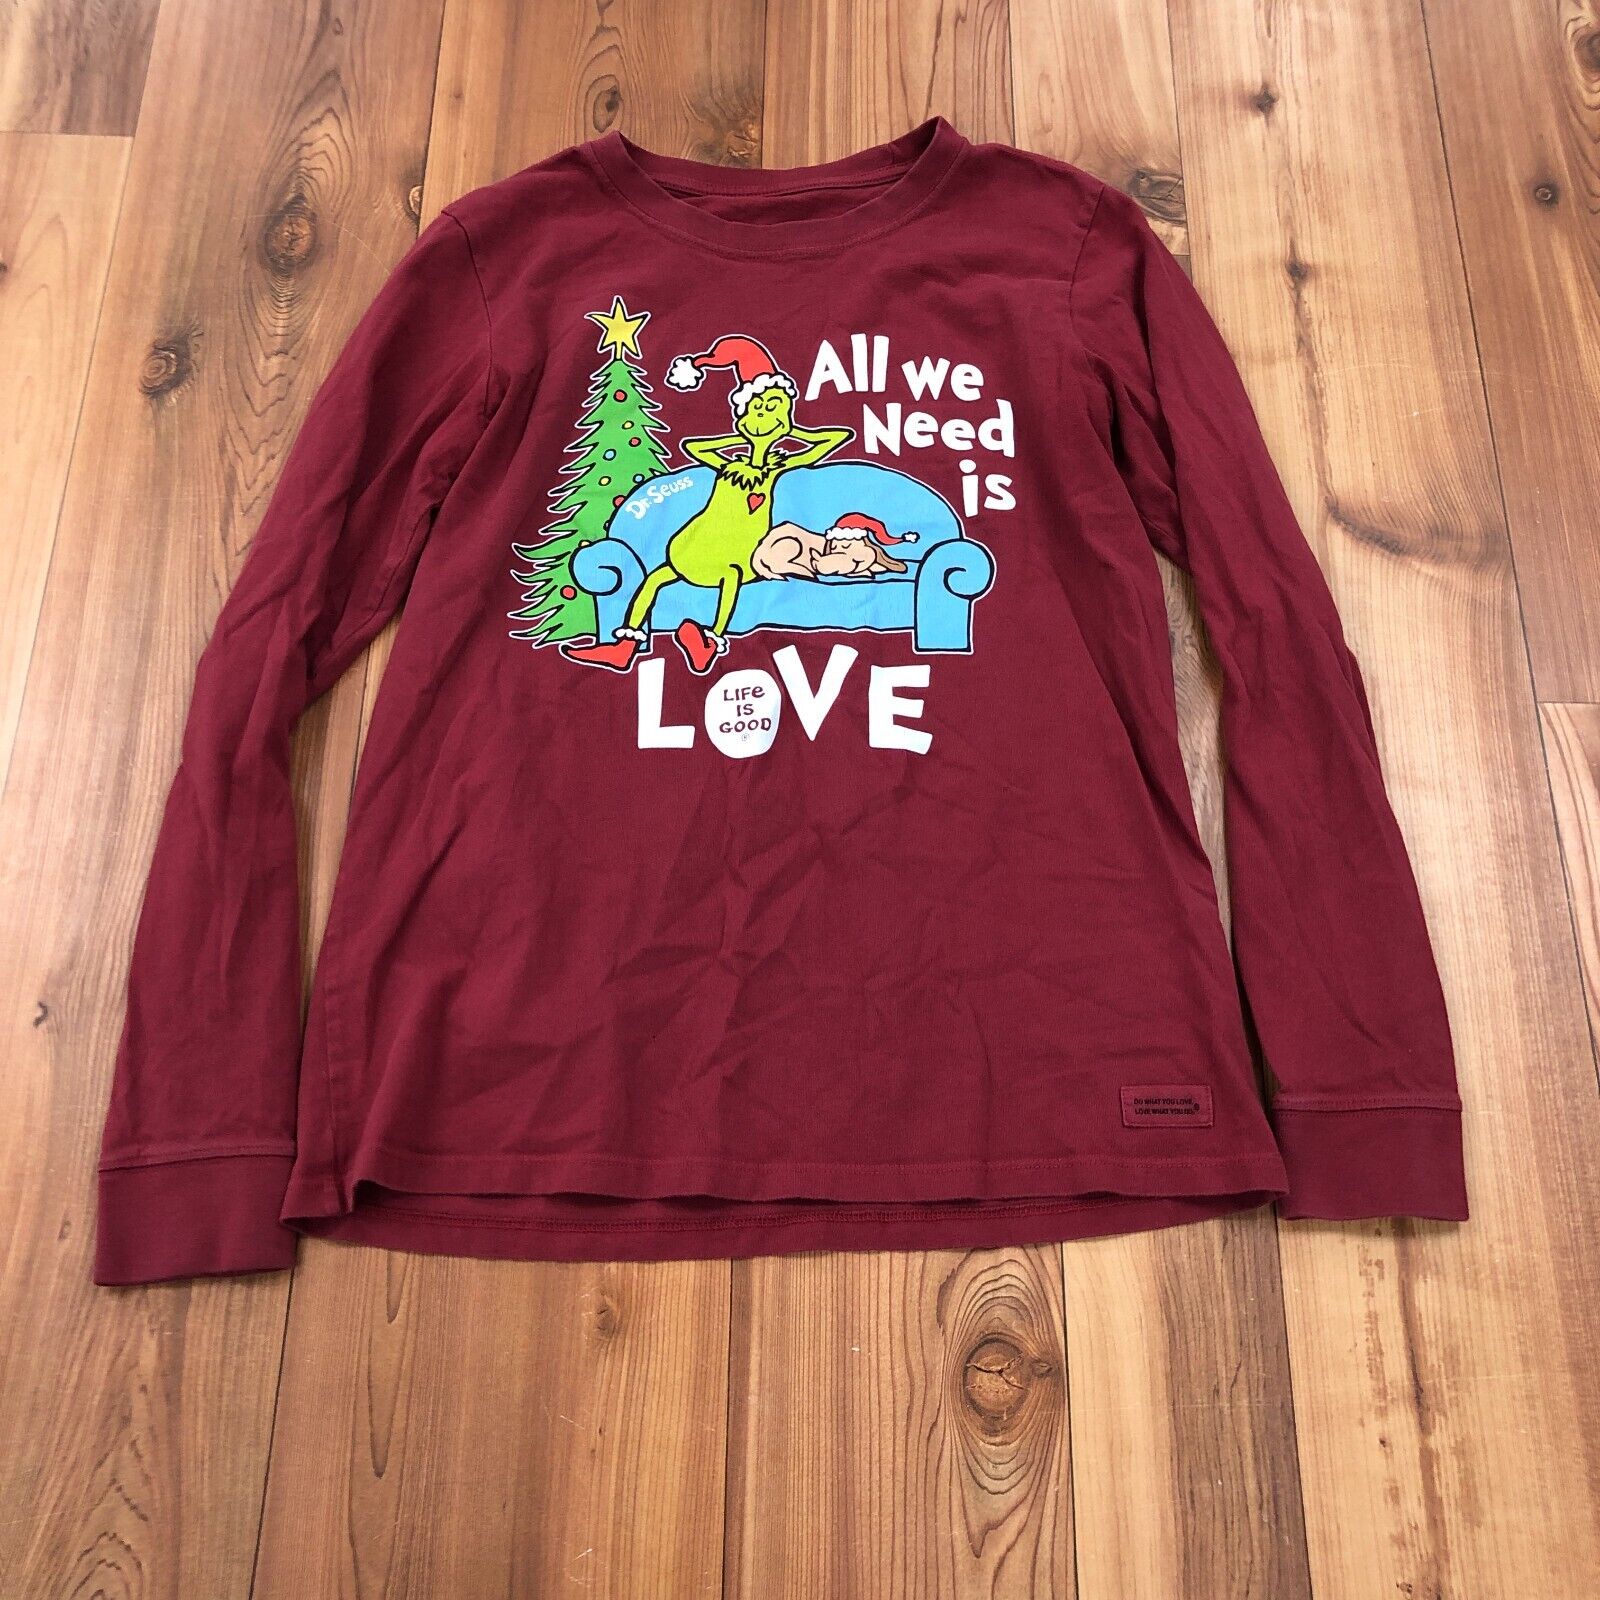 Life Is Good Burgundy Long Sleeve Dr. Seuss Holiday Graphic T-Shirt Adult M